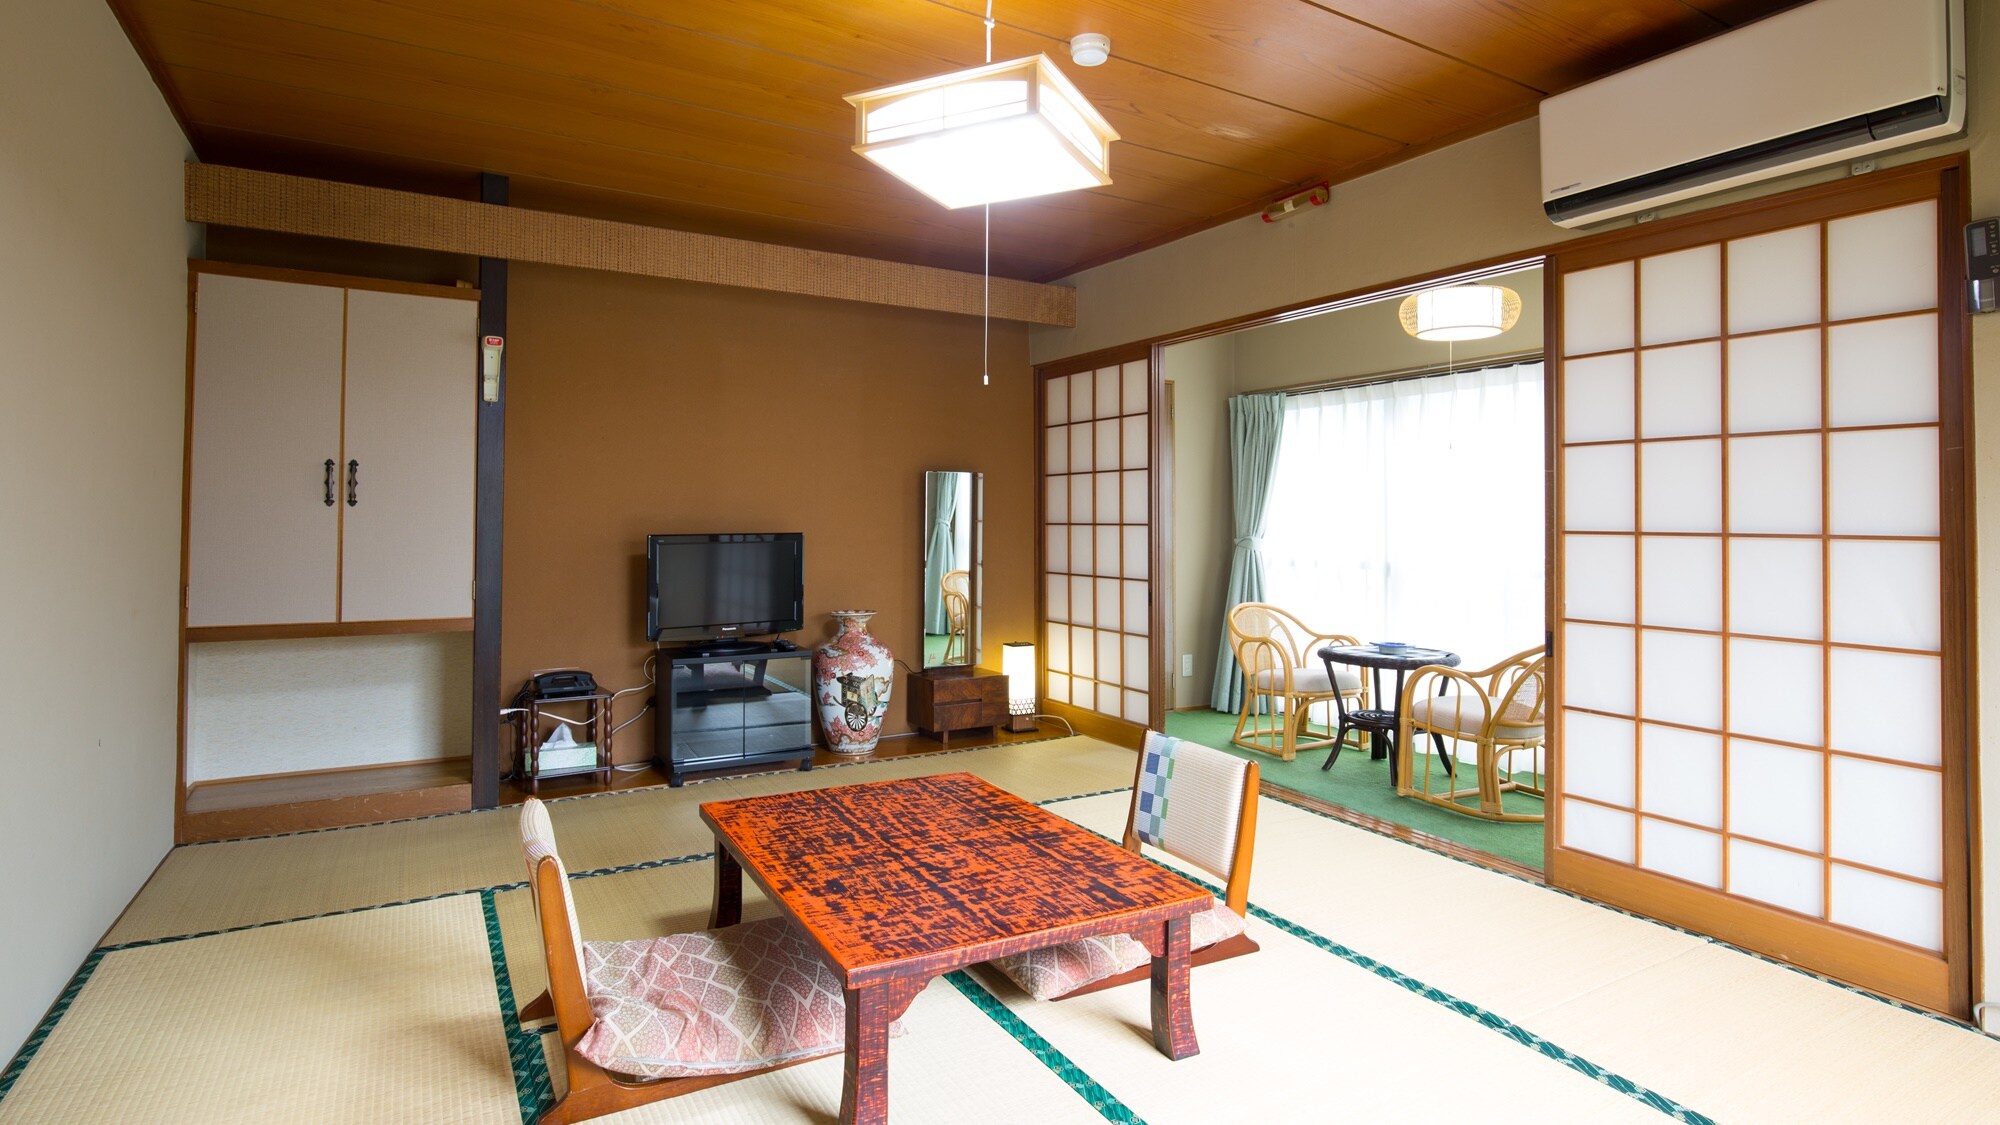 * An example of a Japanese-style room / Please spend a relaxing time in a calm space